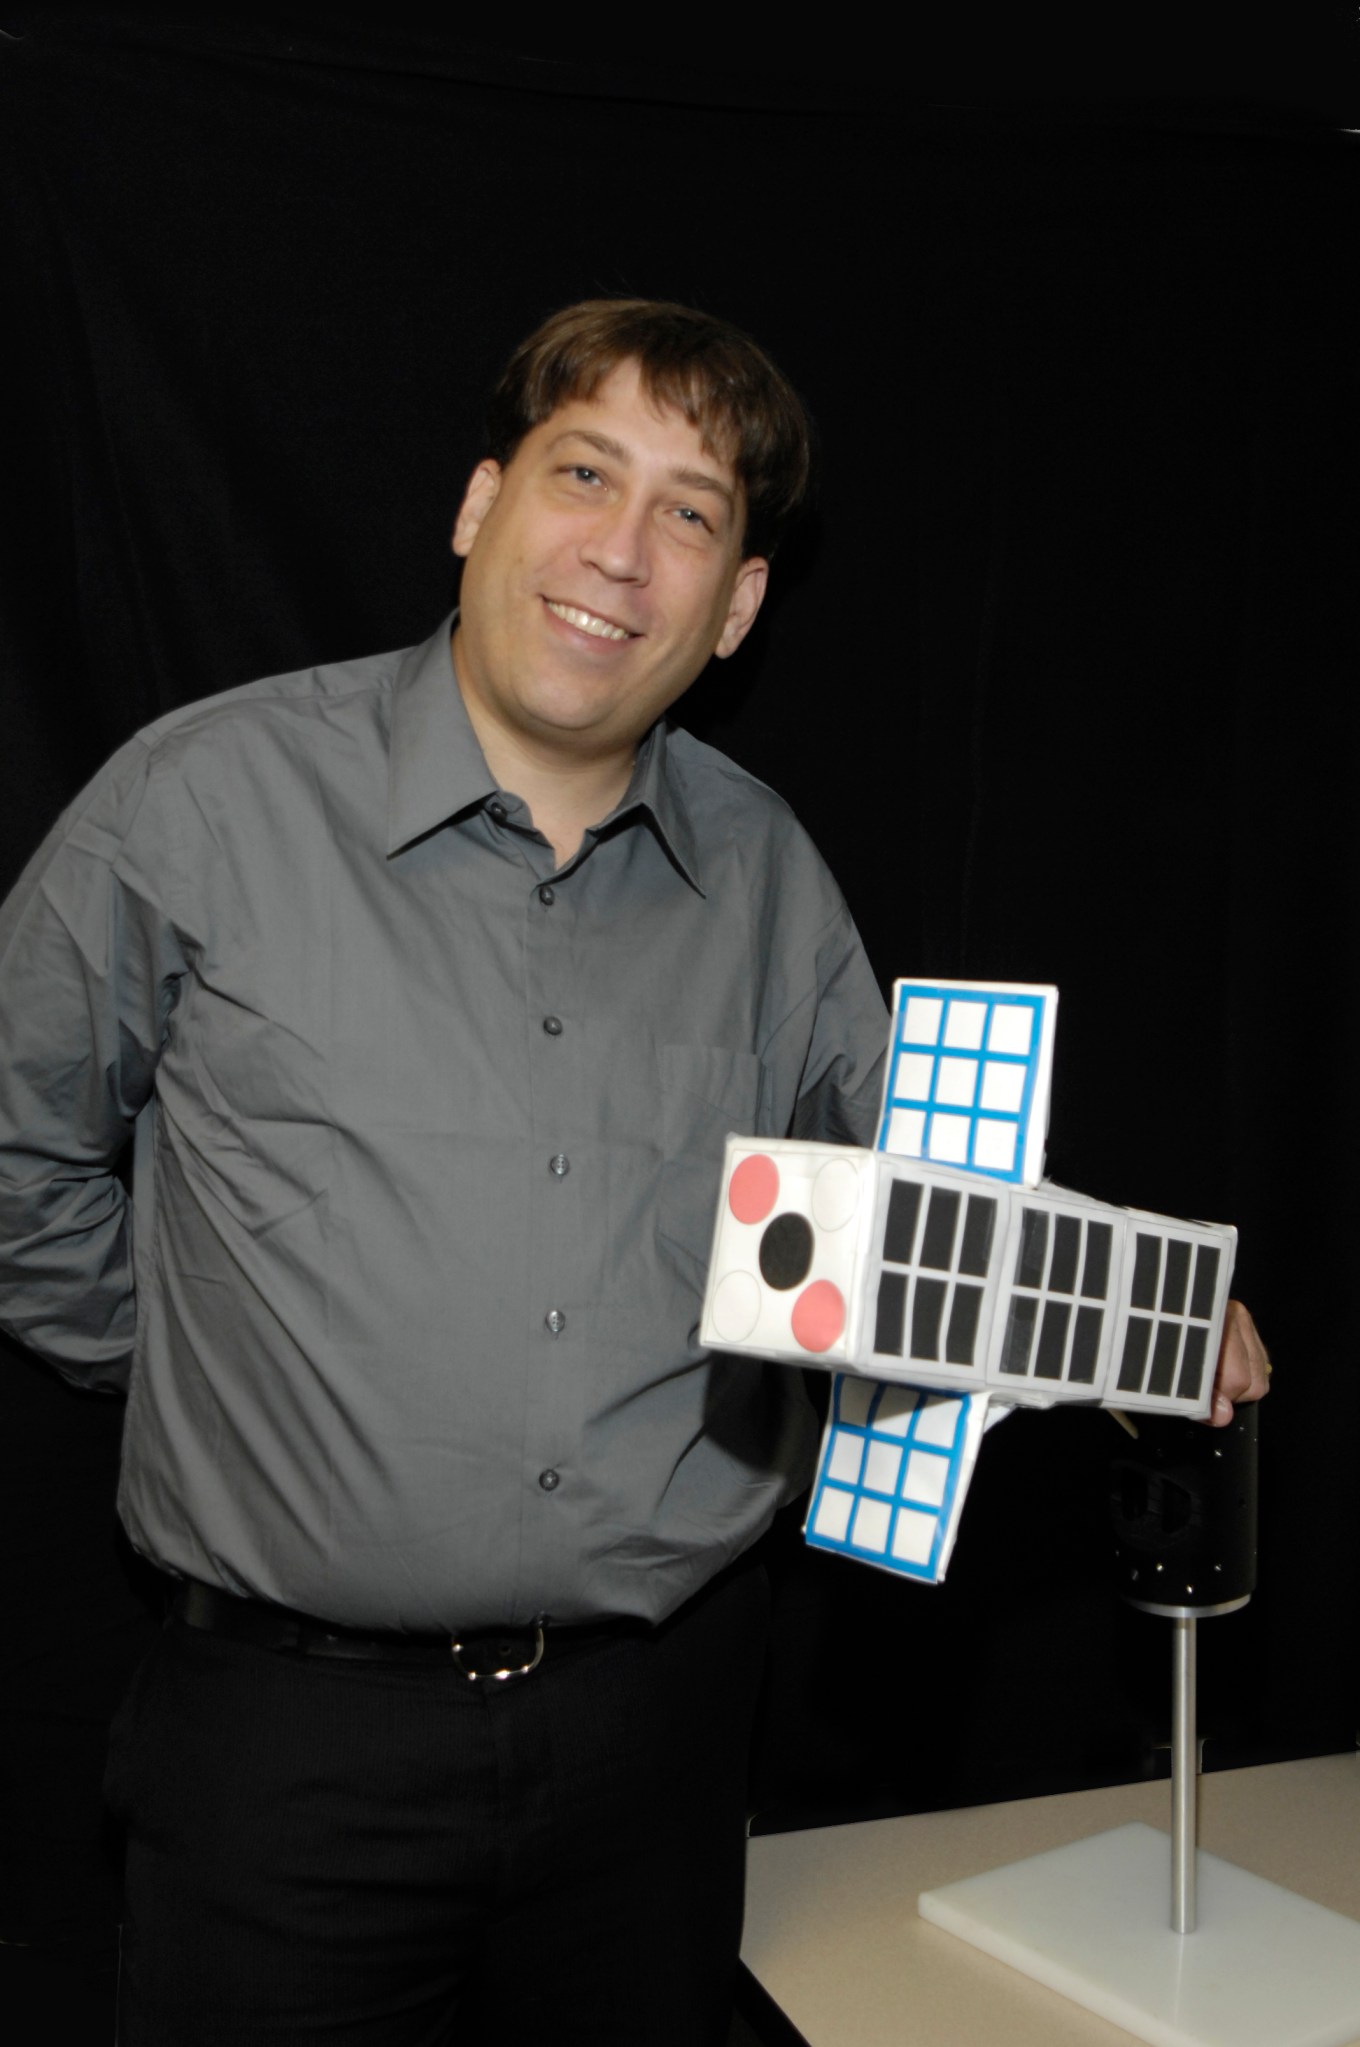 Doug Rowland with model of cubesat